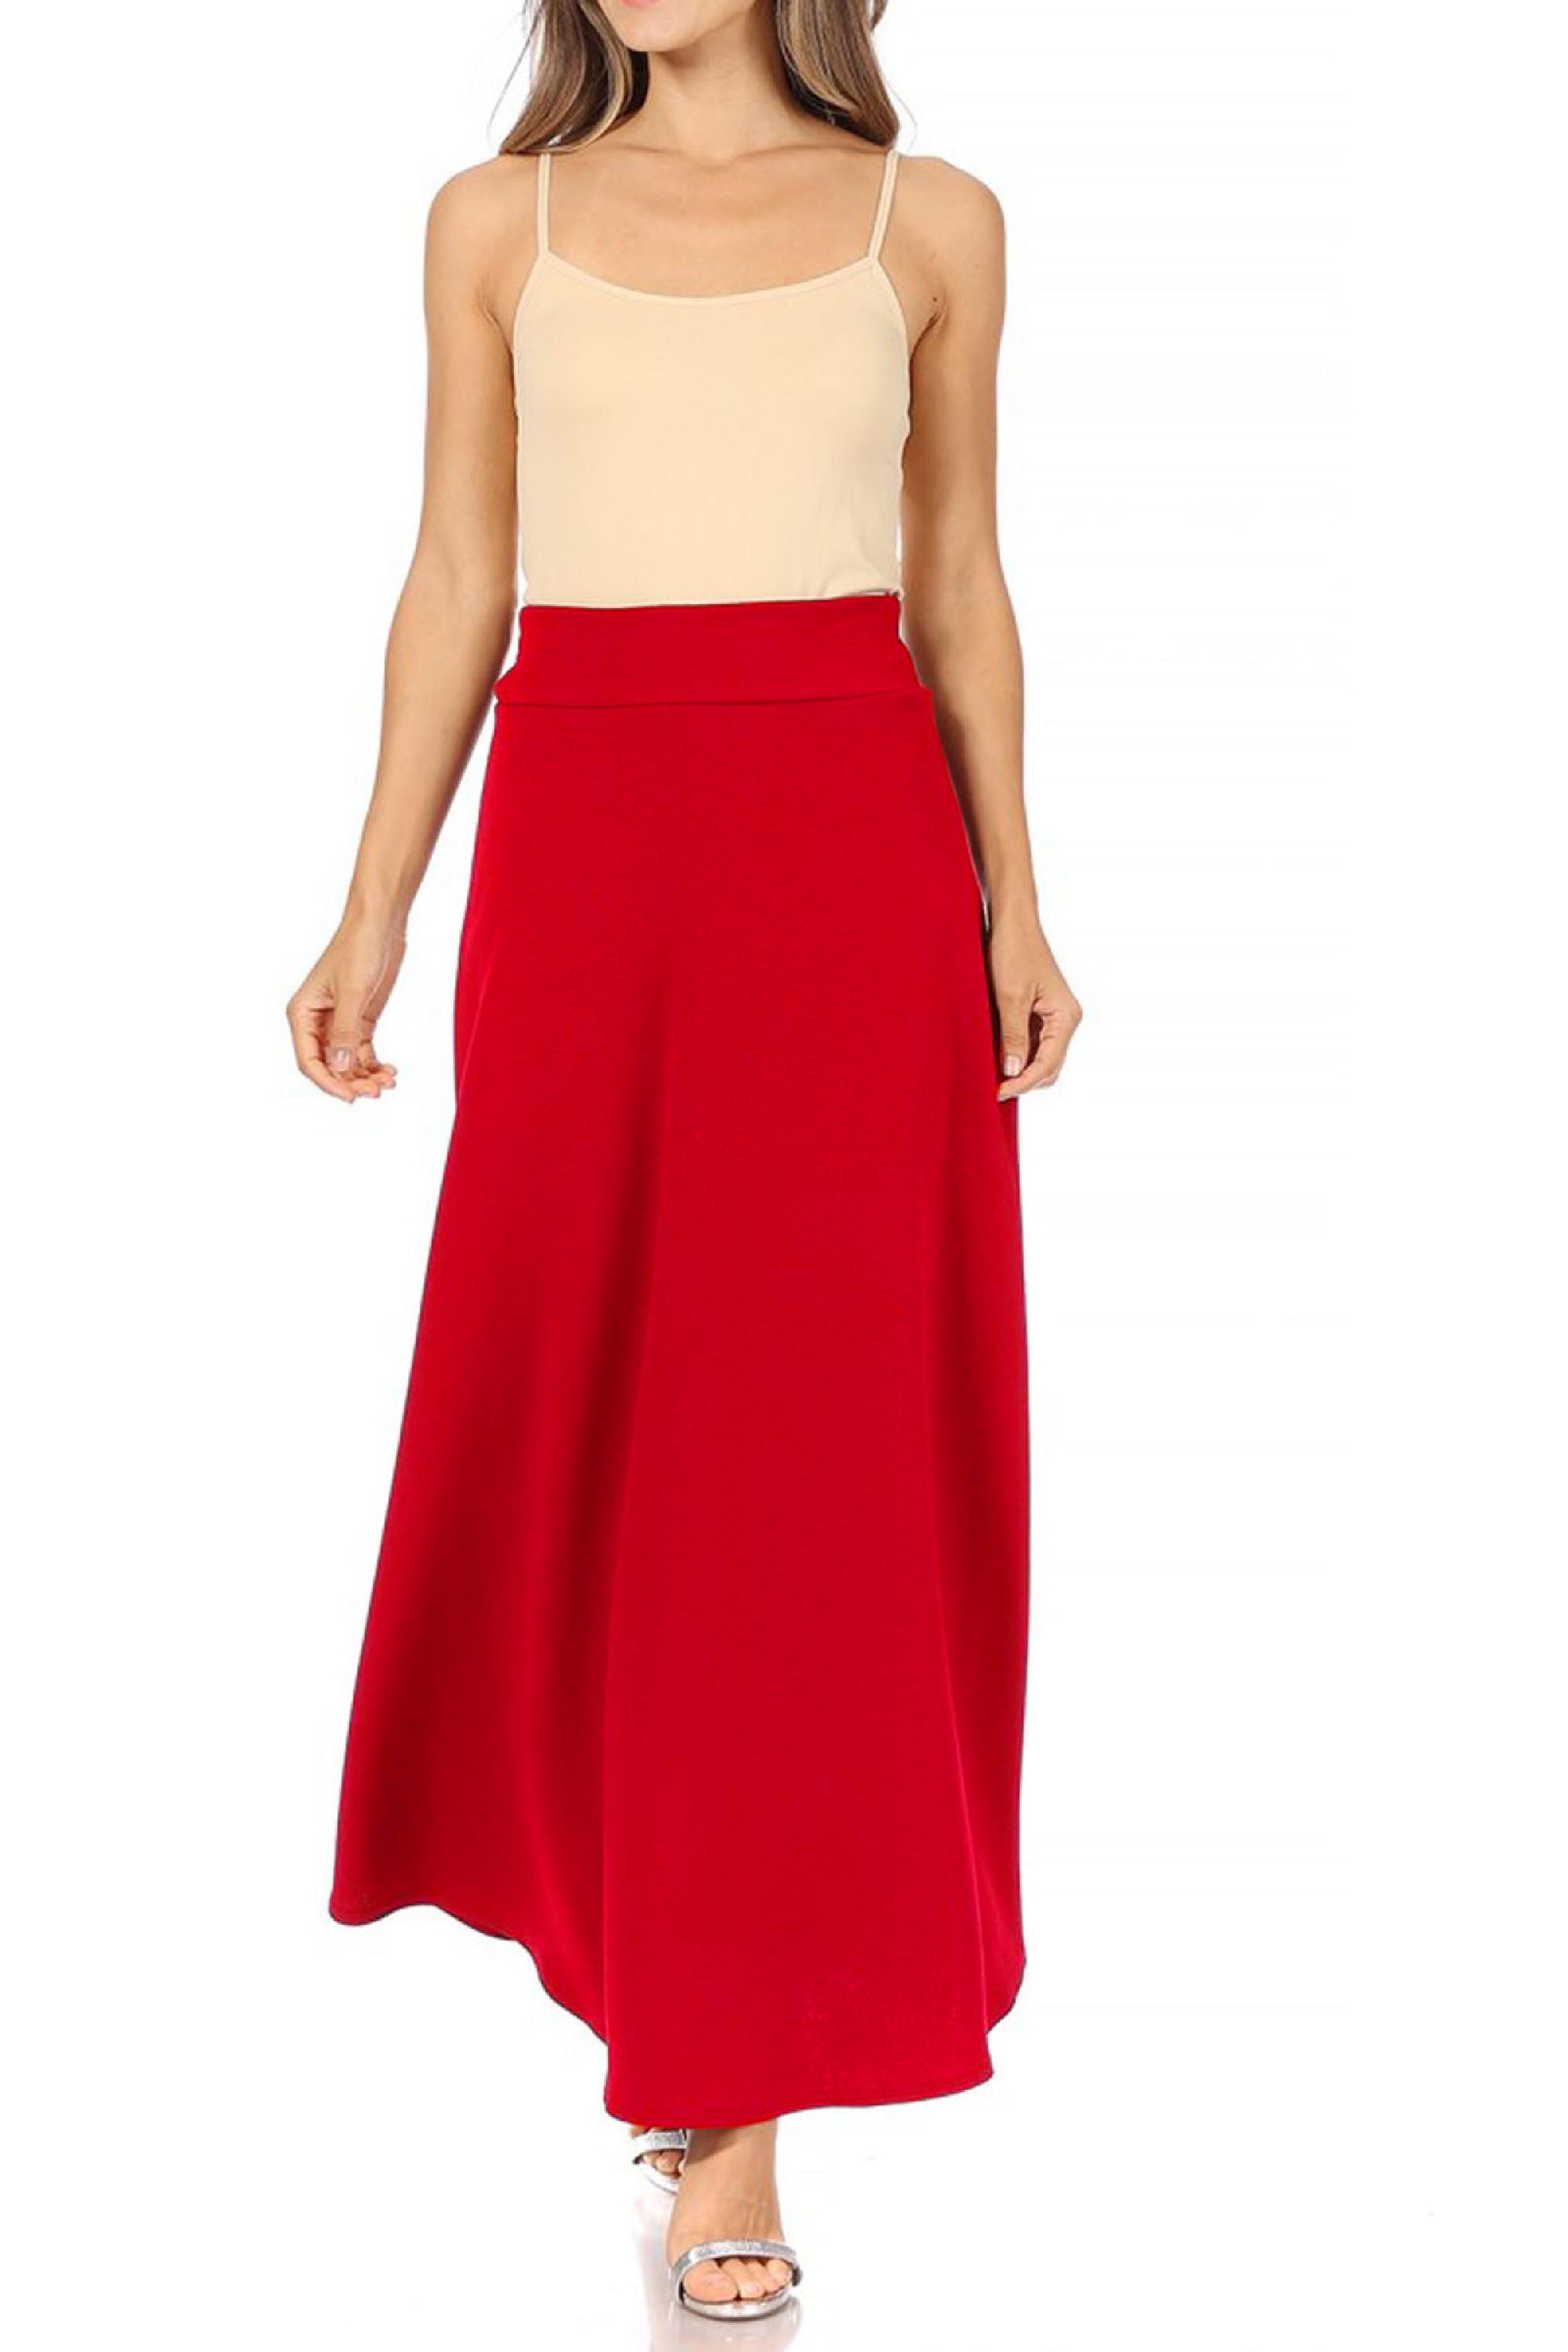 Women's Casual Solid Flare A-line Long Skirt - FashionJOA